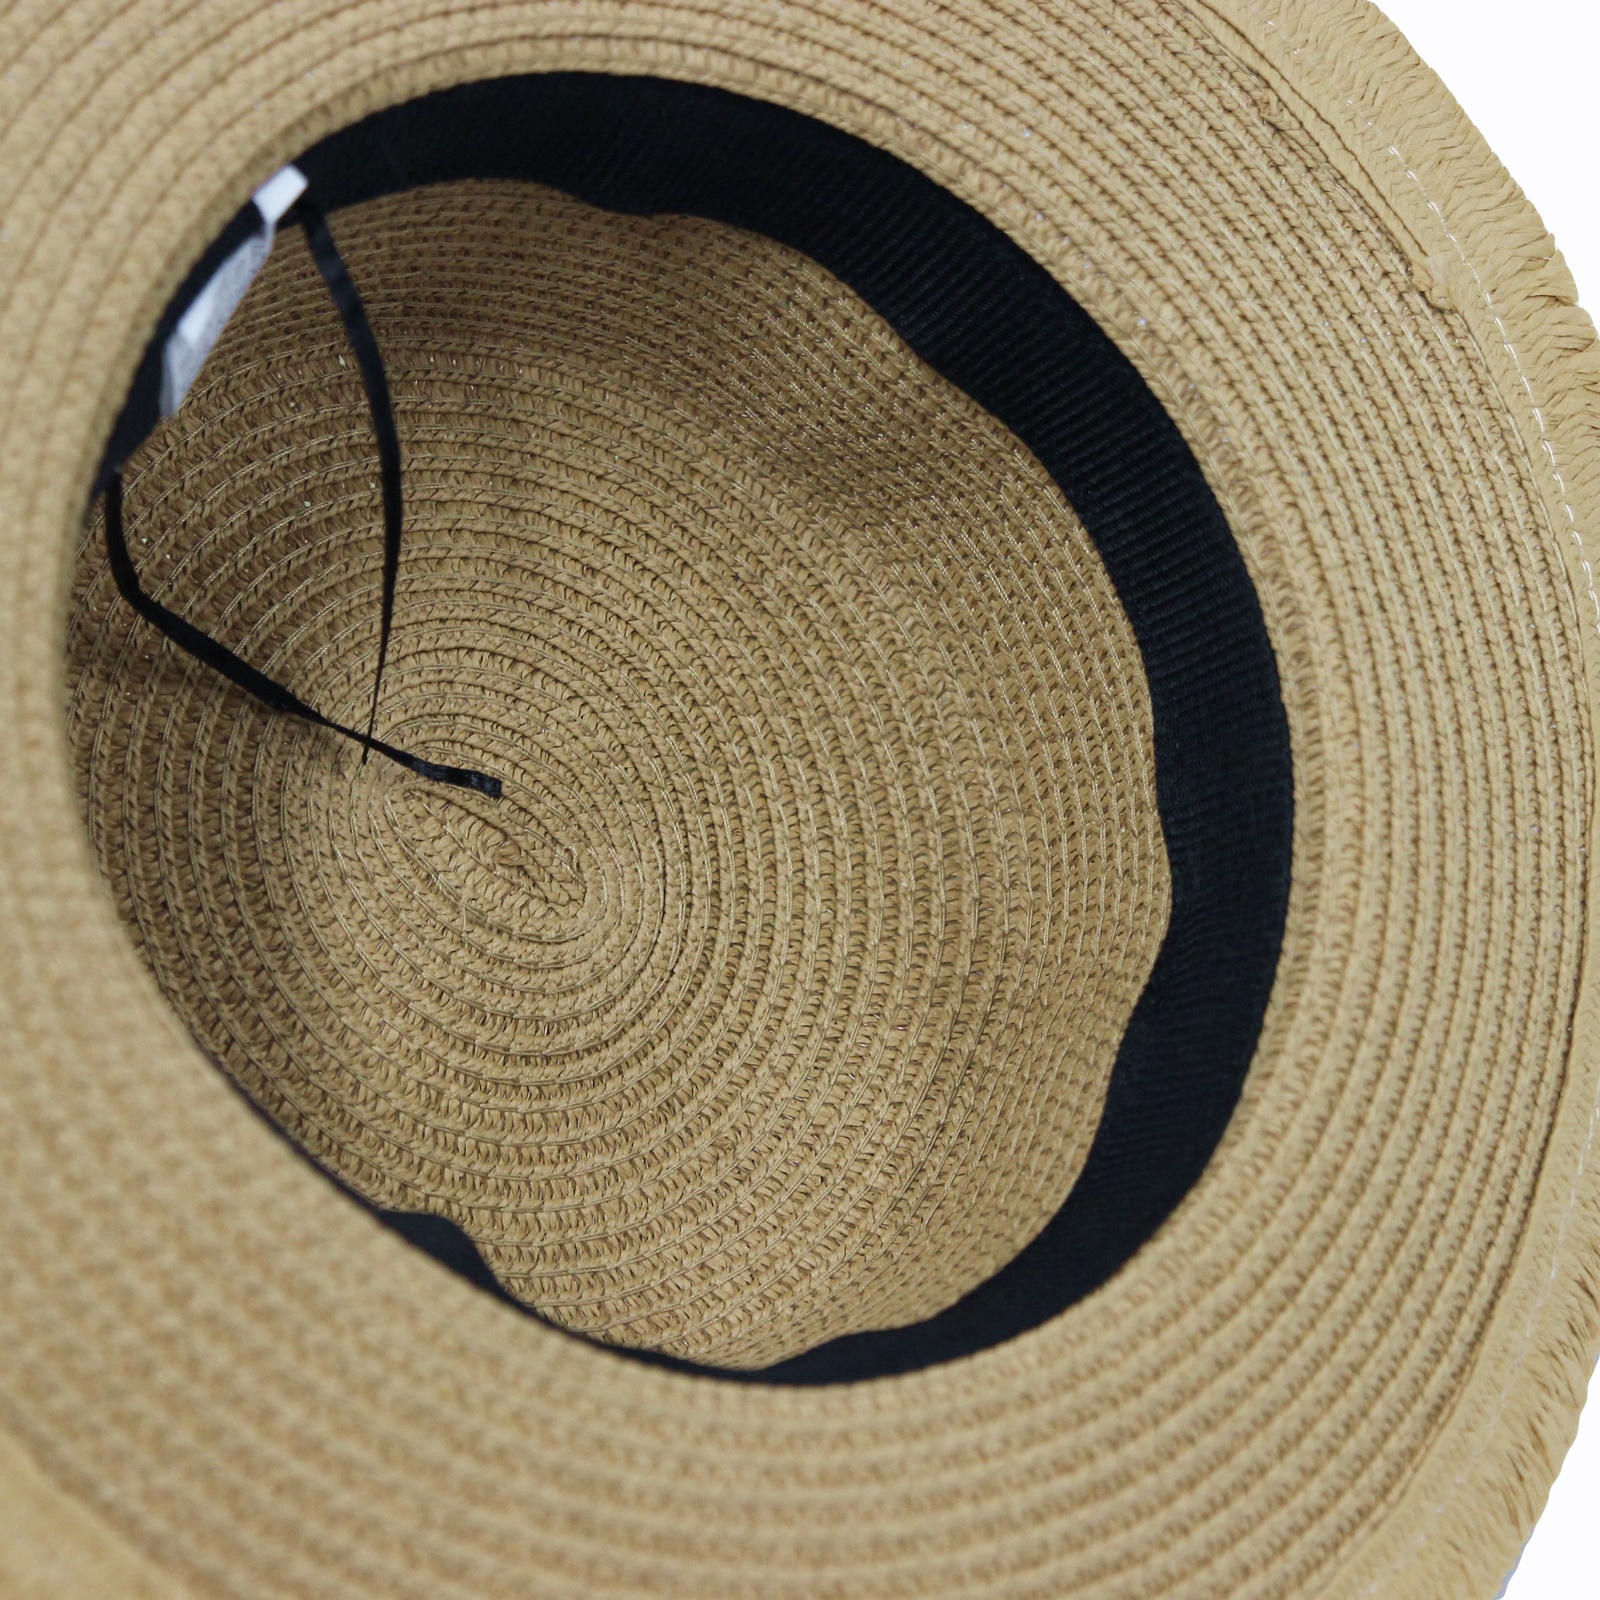 WITHMOONS Boater Skimmer Sailor Straw Amish Hat Banded 1920 Costumes ...